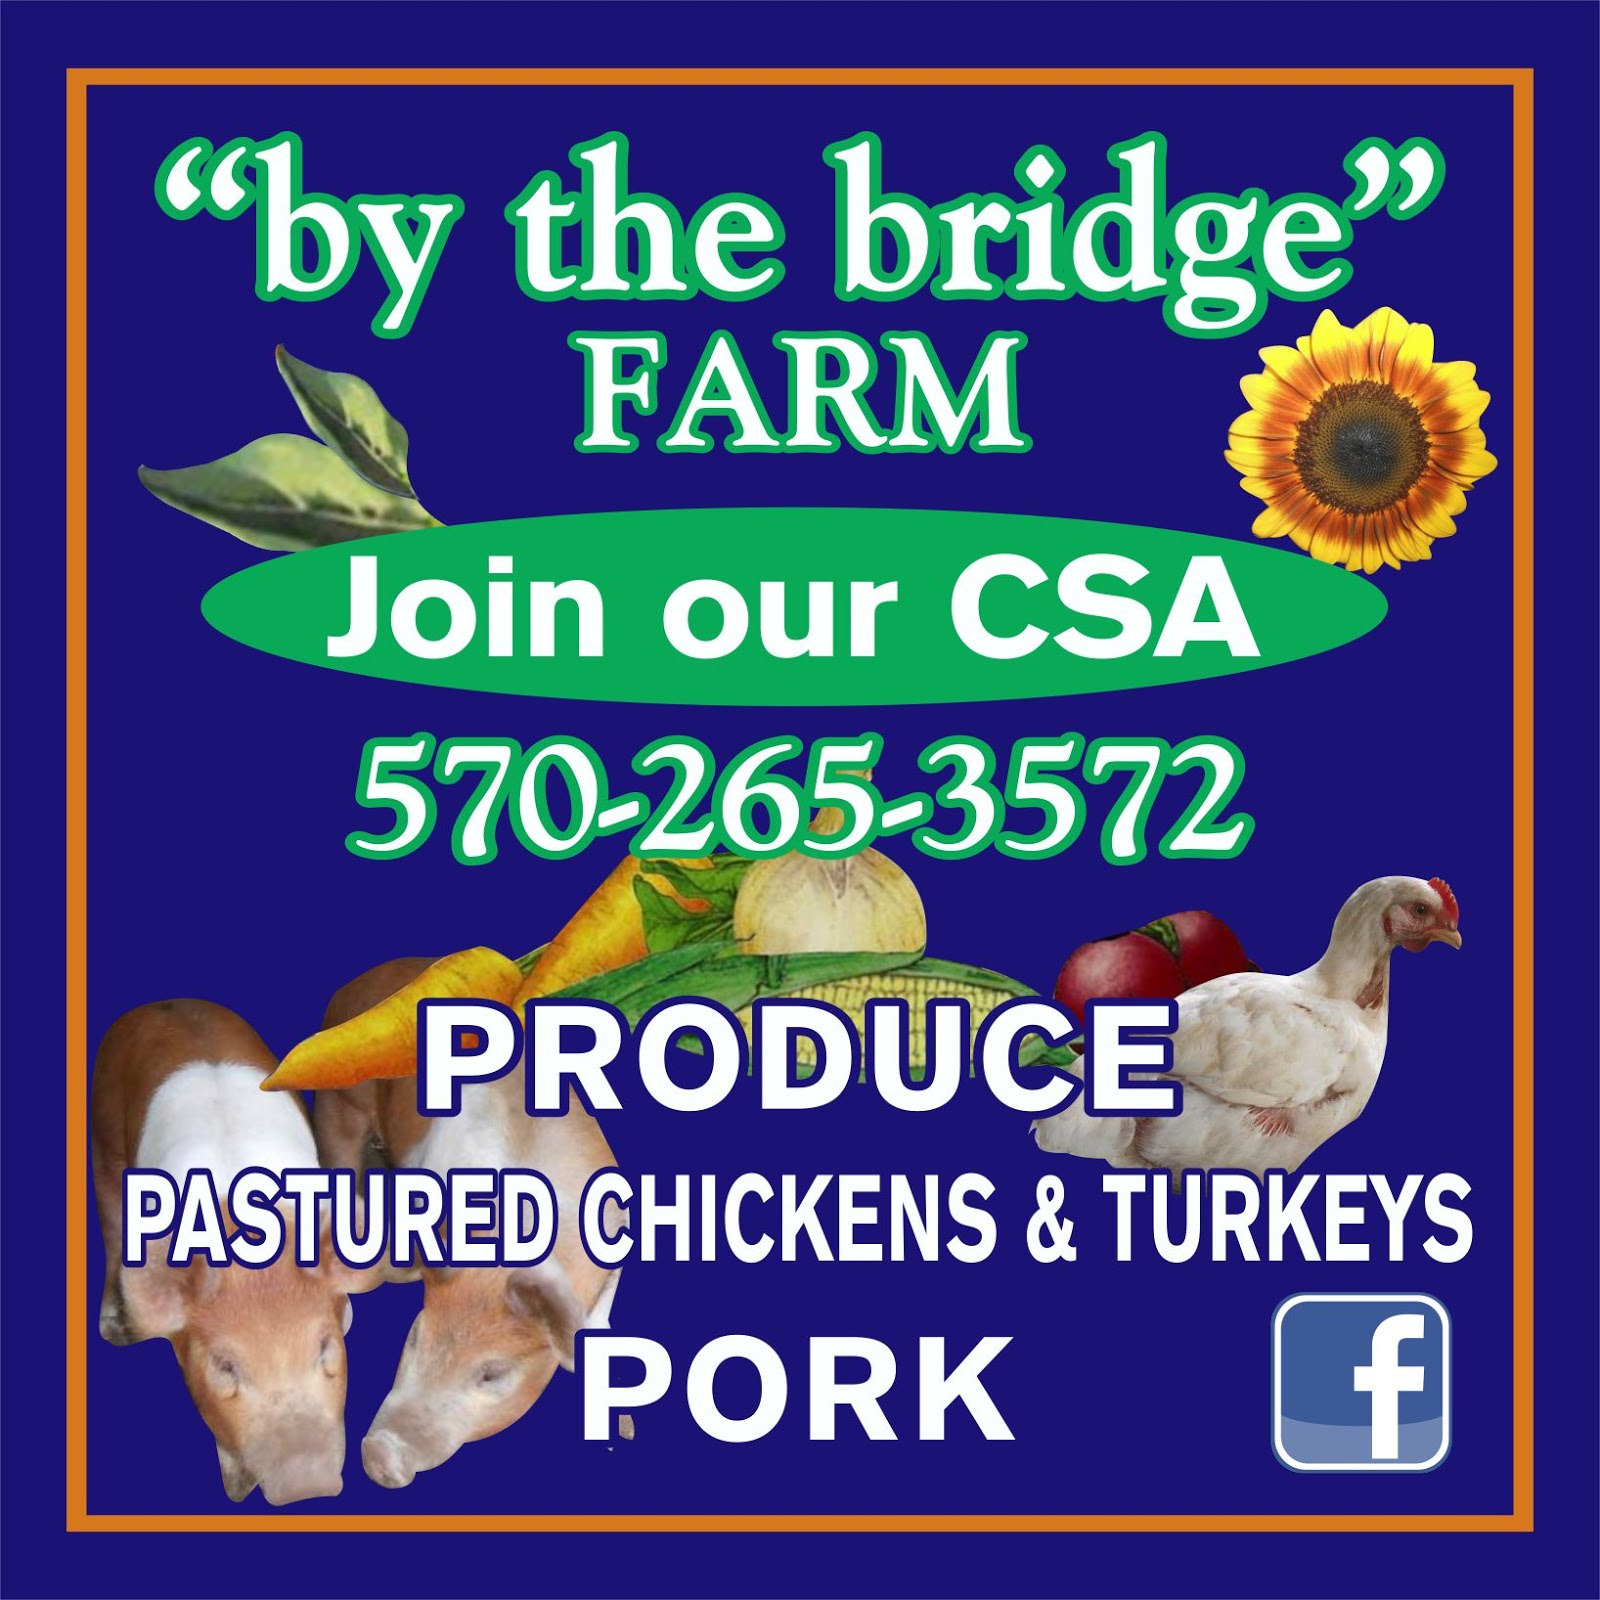 click our logo to visit our LocalHarvest listing